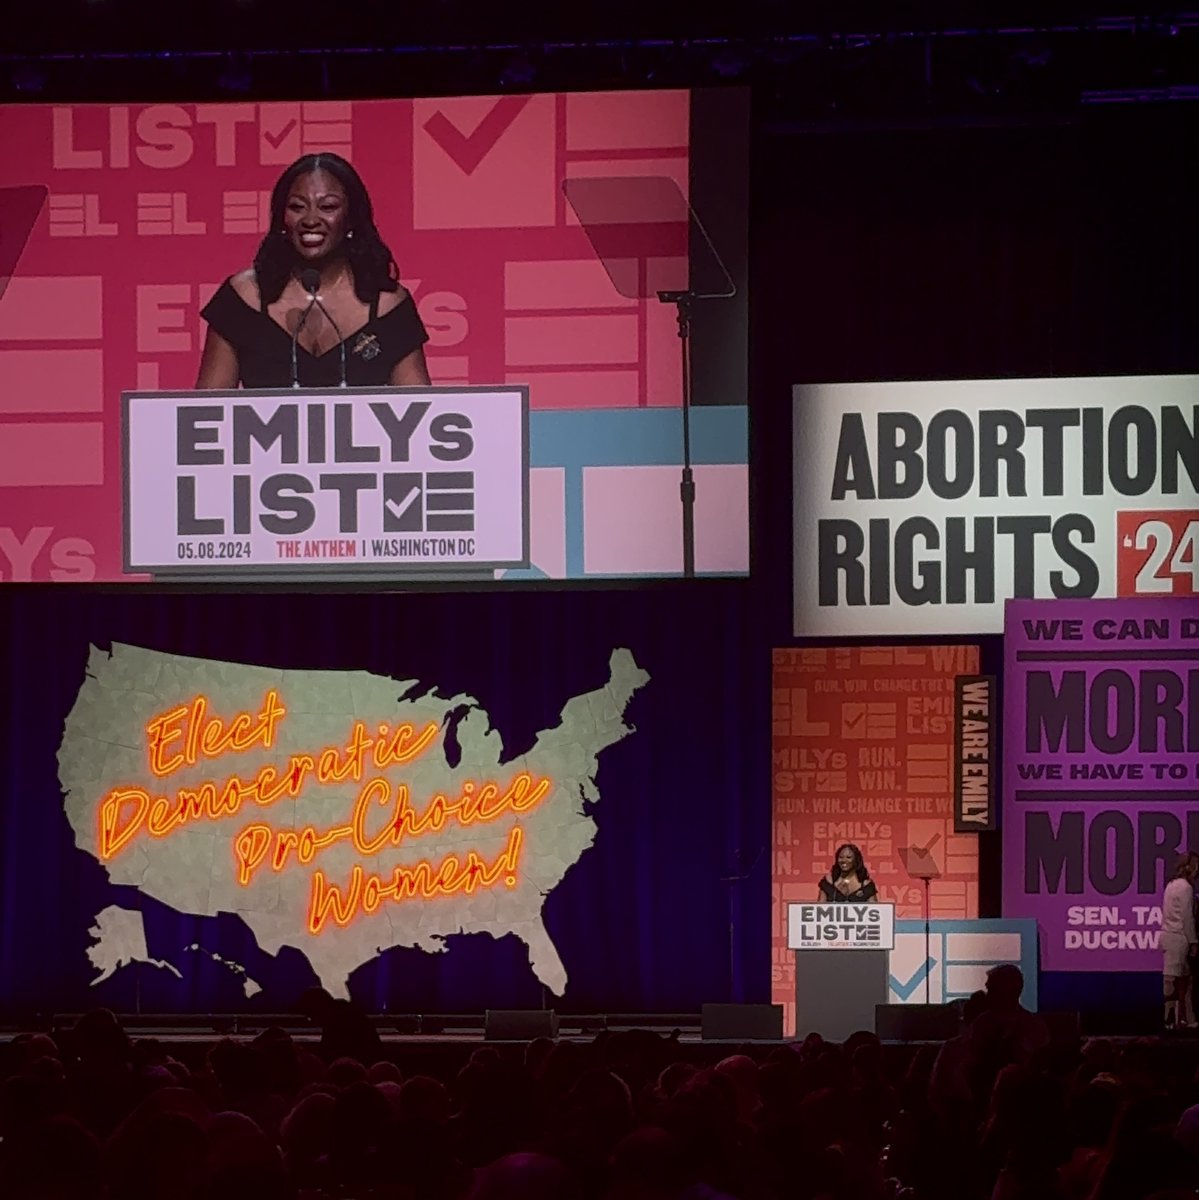 I was beaming with pride to see @SarahAnthony517 on the main stage last night, receiving the Rising Star award at the @emilyslist gala last night. We are a long way from 2018, when Sarah and I knocked doors together in Lansing. Now she’s the first Black woman to serve as